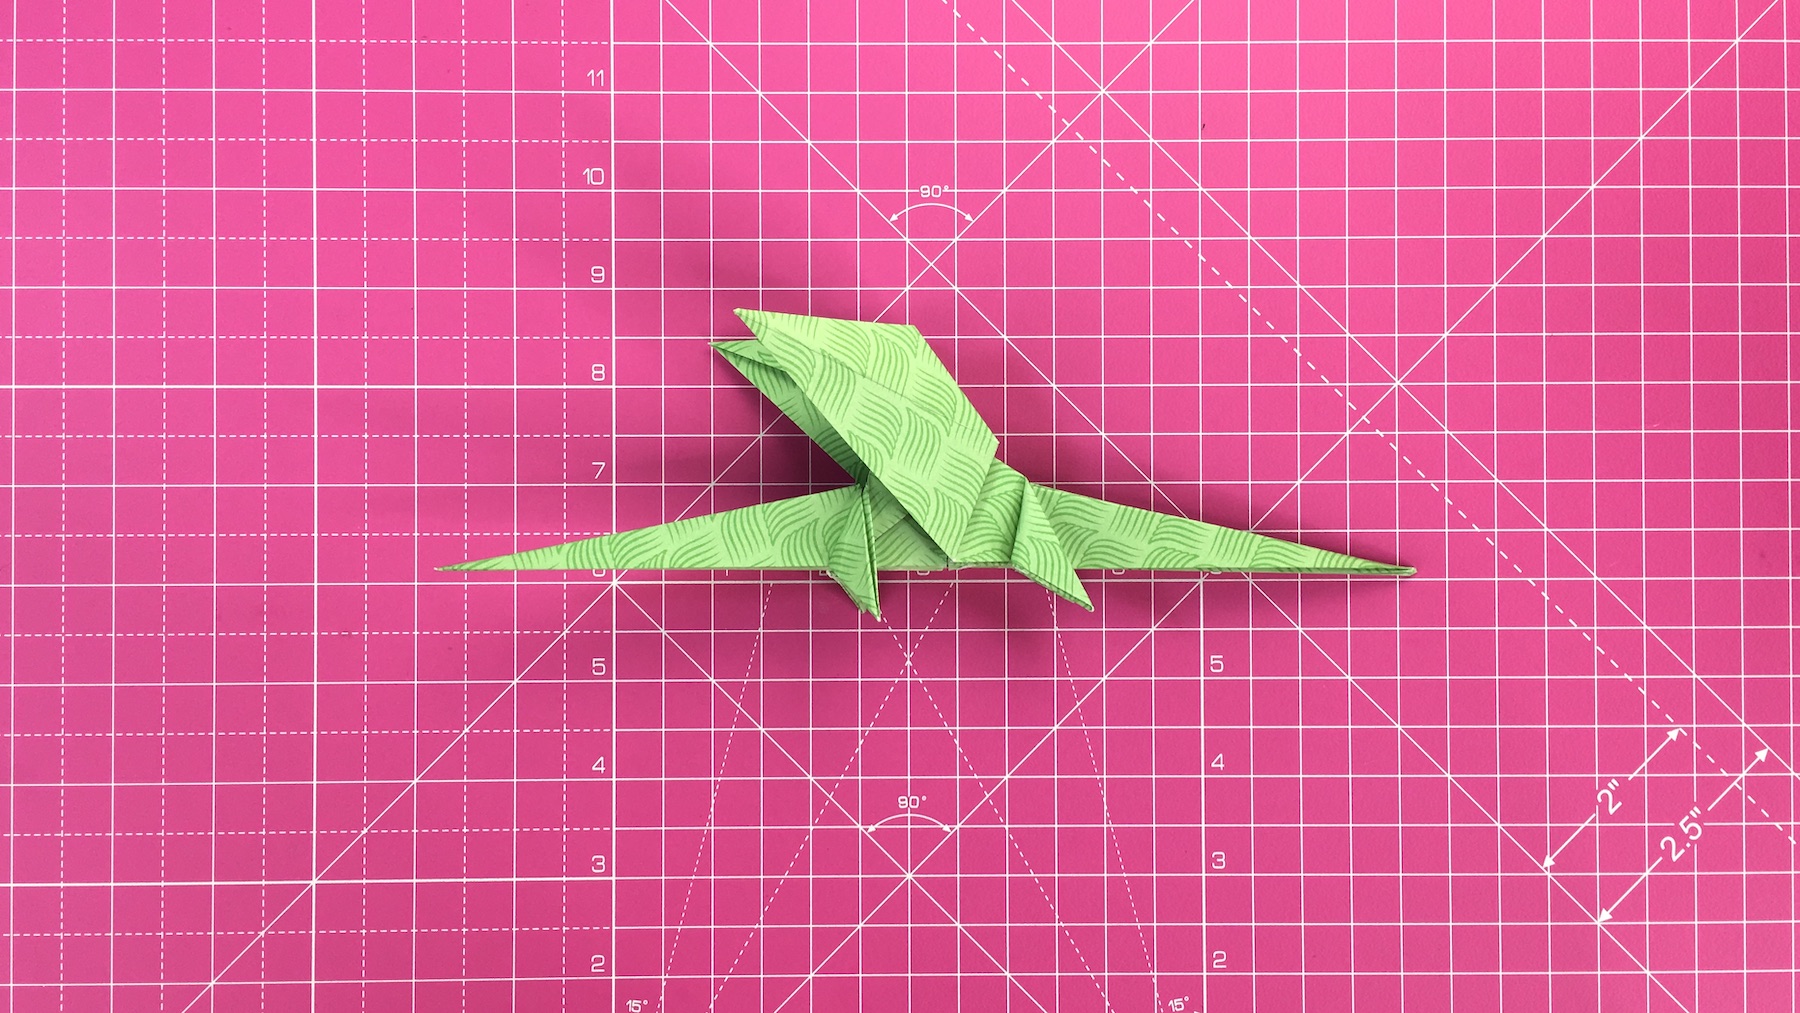 How to make an origami dragon, origami dragon tutorial - step 46